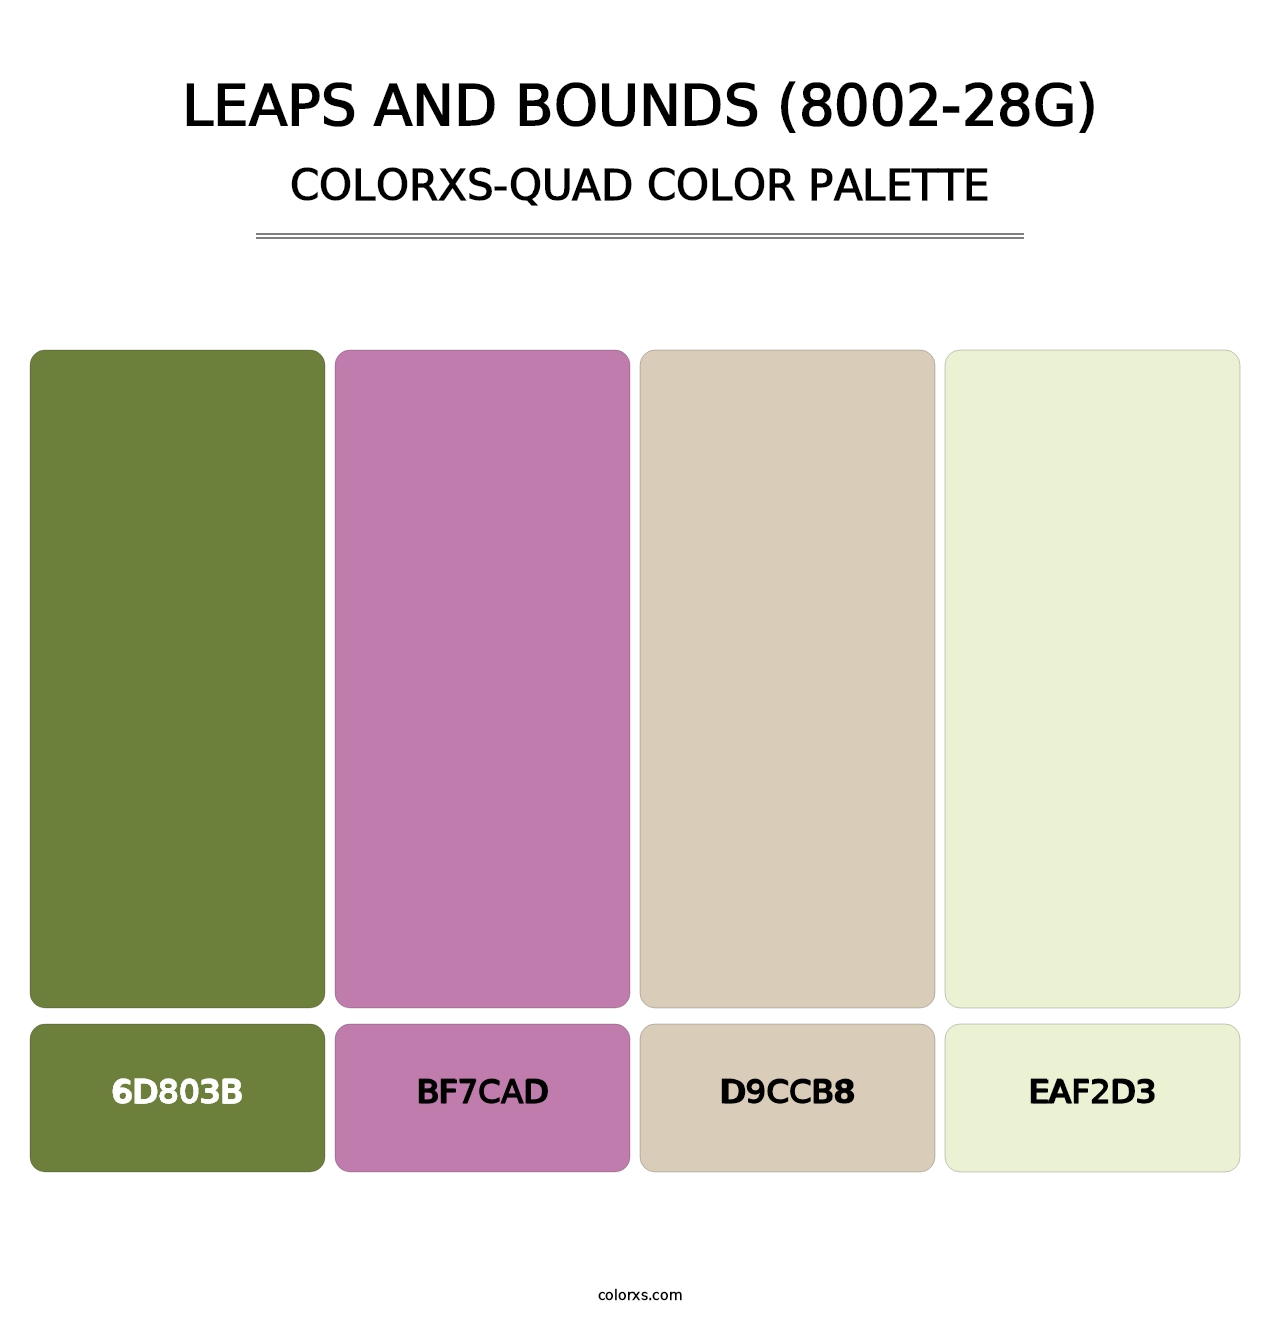 Leaps and Bounds (8002-28G) - Colorxs Quad Palette